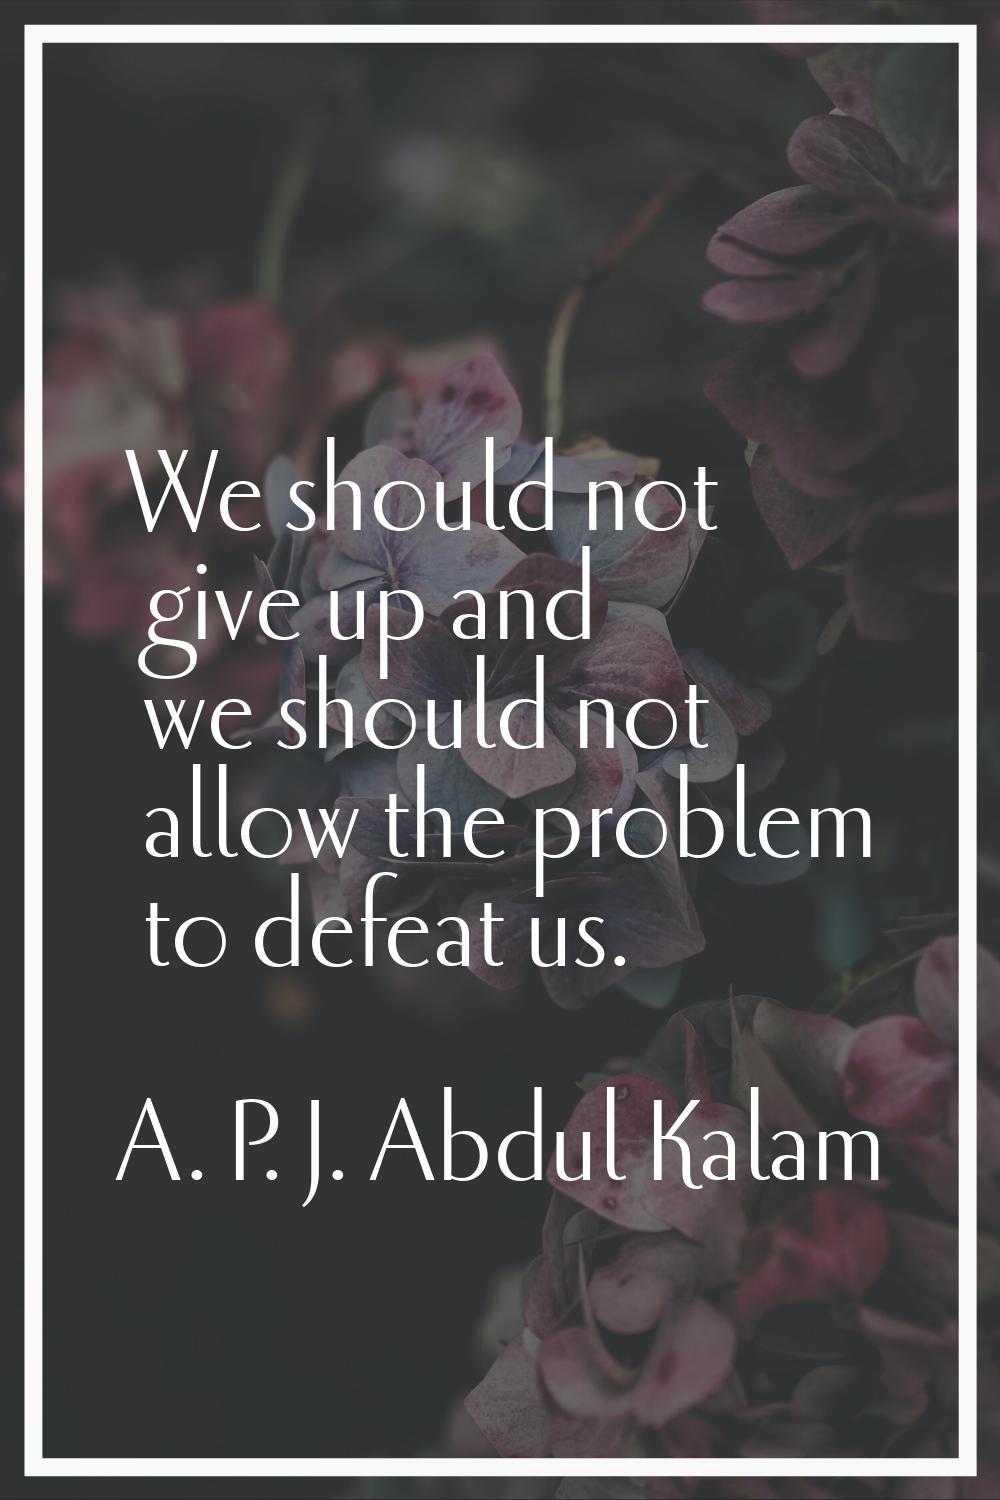 We should not give up and we should not allow the problem to defeat us.